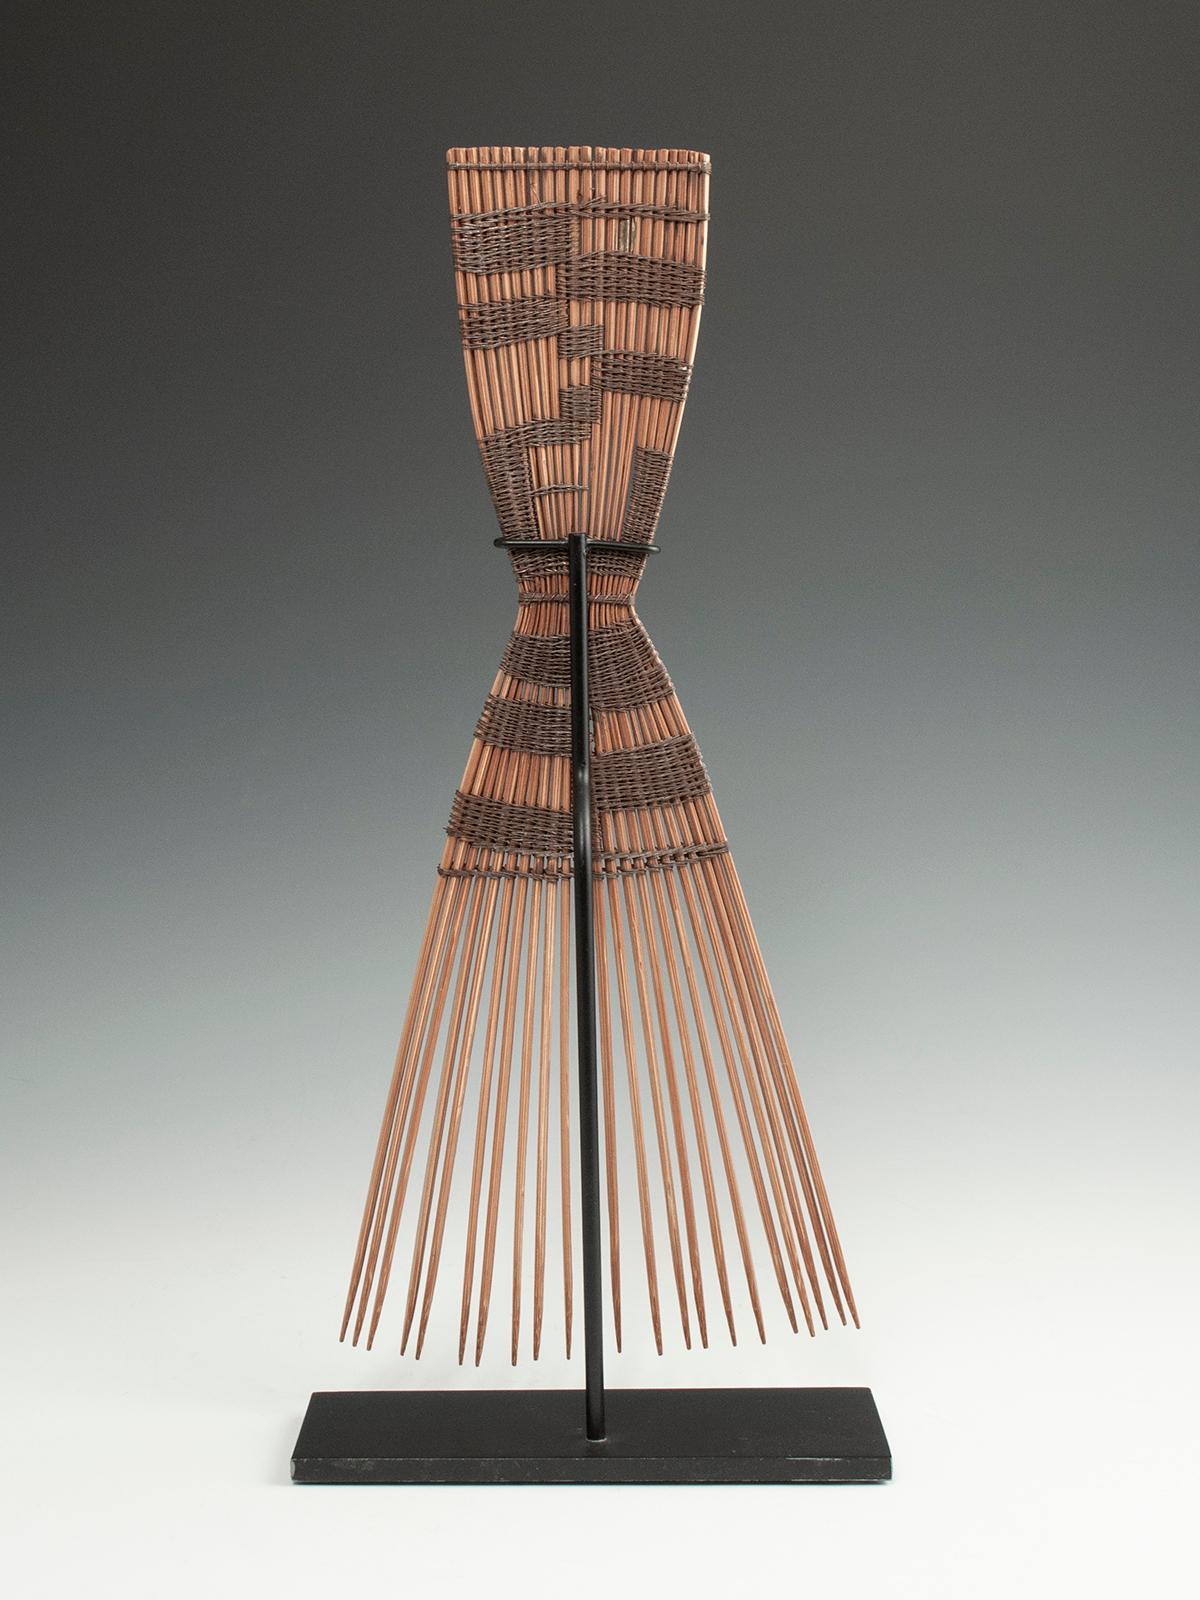 Tribal Mid-20th Century Ceremonial Comb, Luba People, Zaire, D. R. Congo For Sale